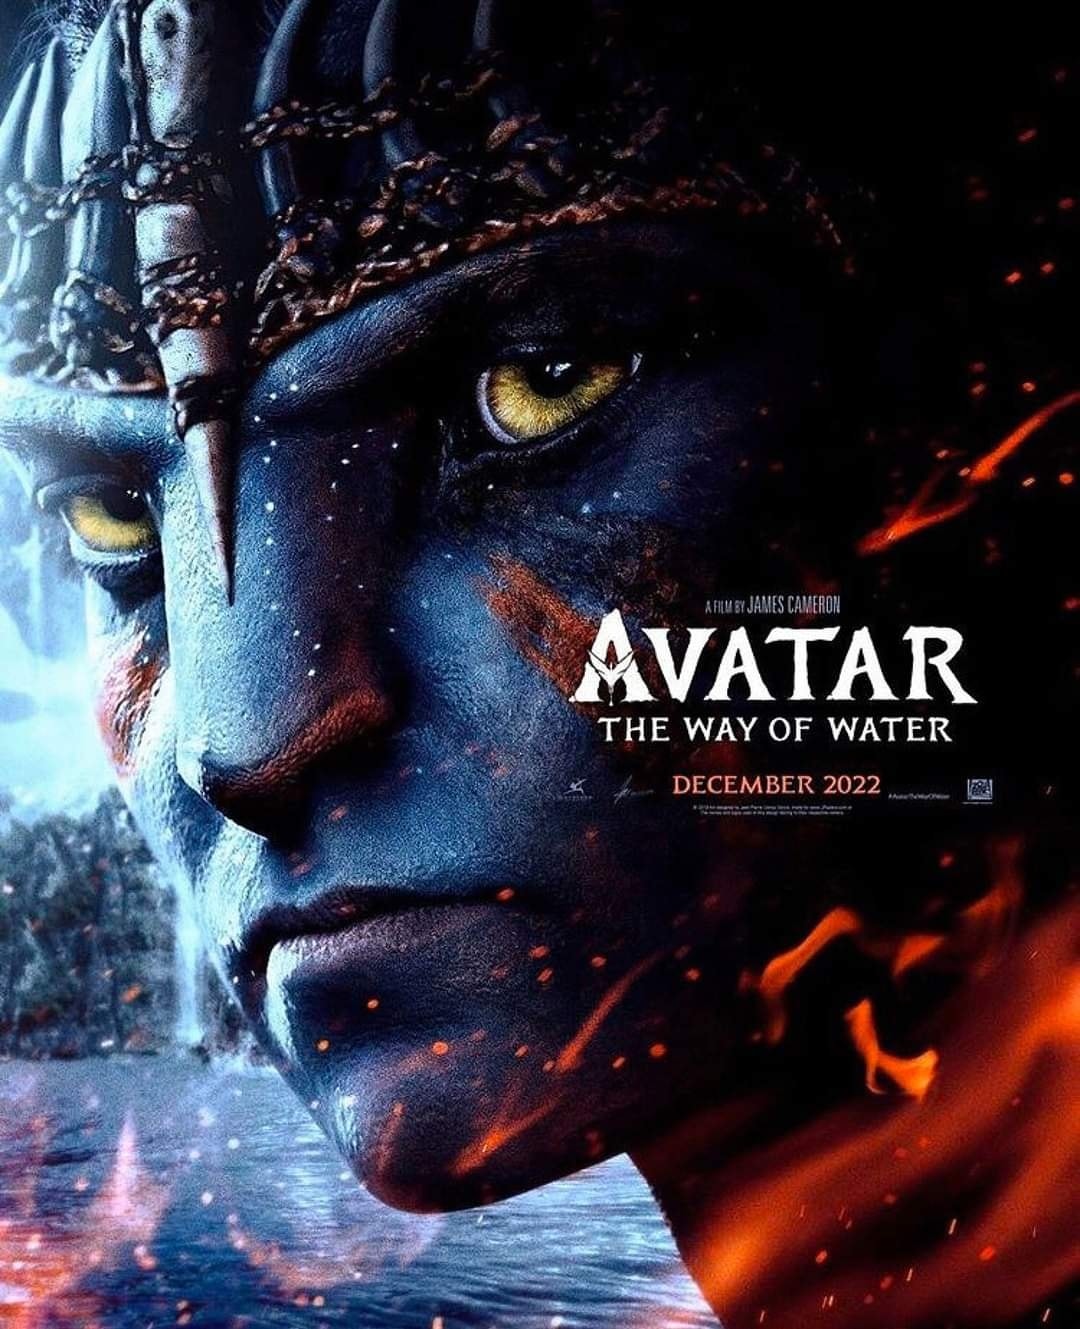 Rich In Meaning Metaphor Visuals  Promise  Avatar 2 Review